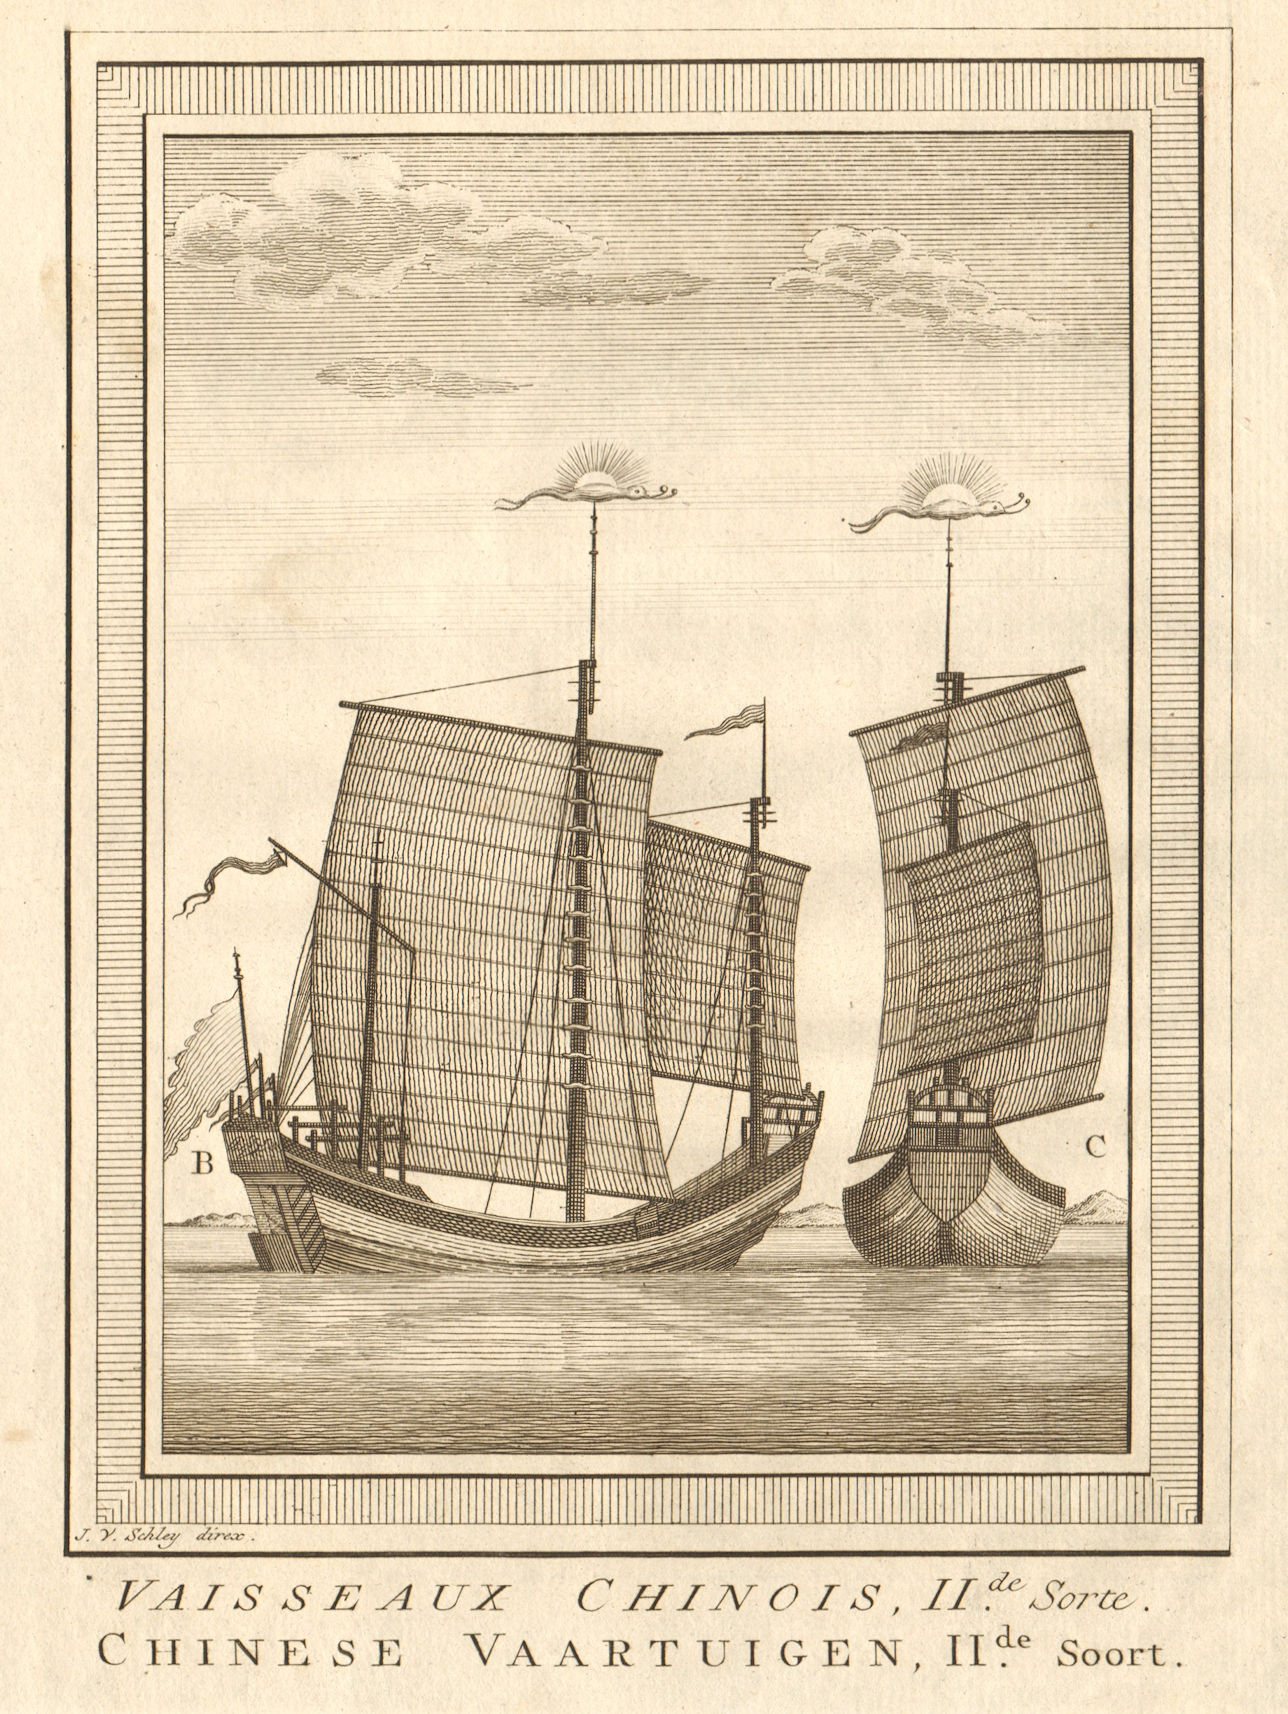 'Vaisseaux Chinois, II.de Sorte'. China. Chinese junks boats ships. SCHLEY 1757